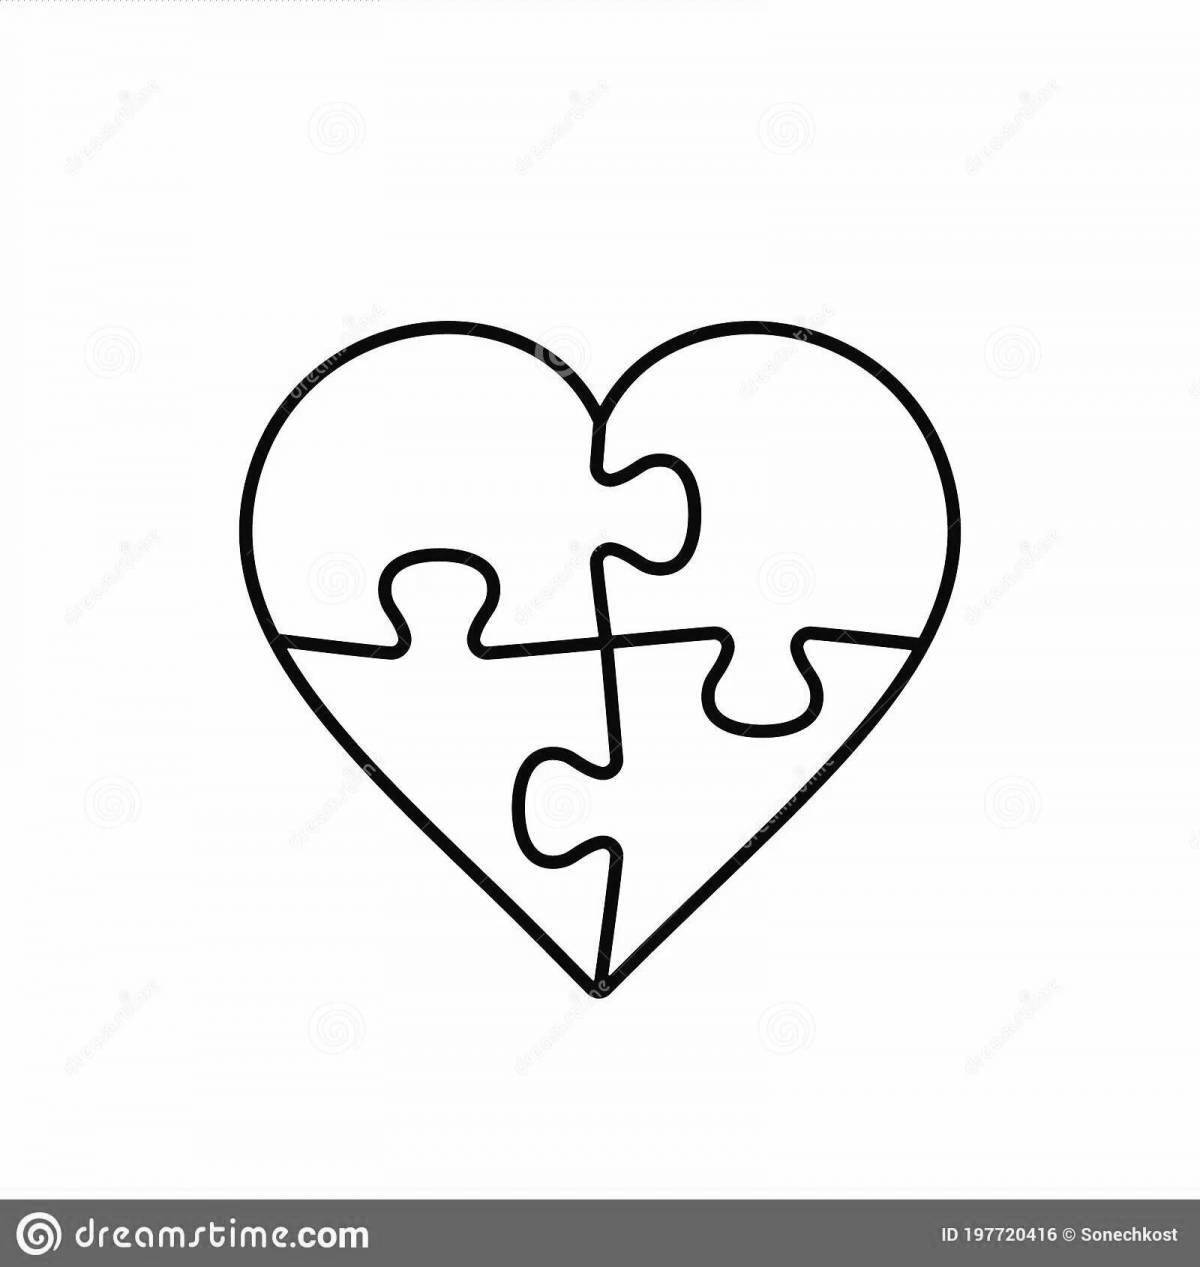 Harmonious heart coloring page